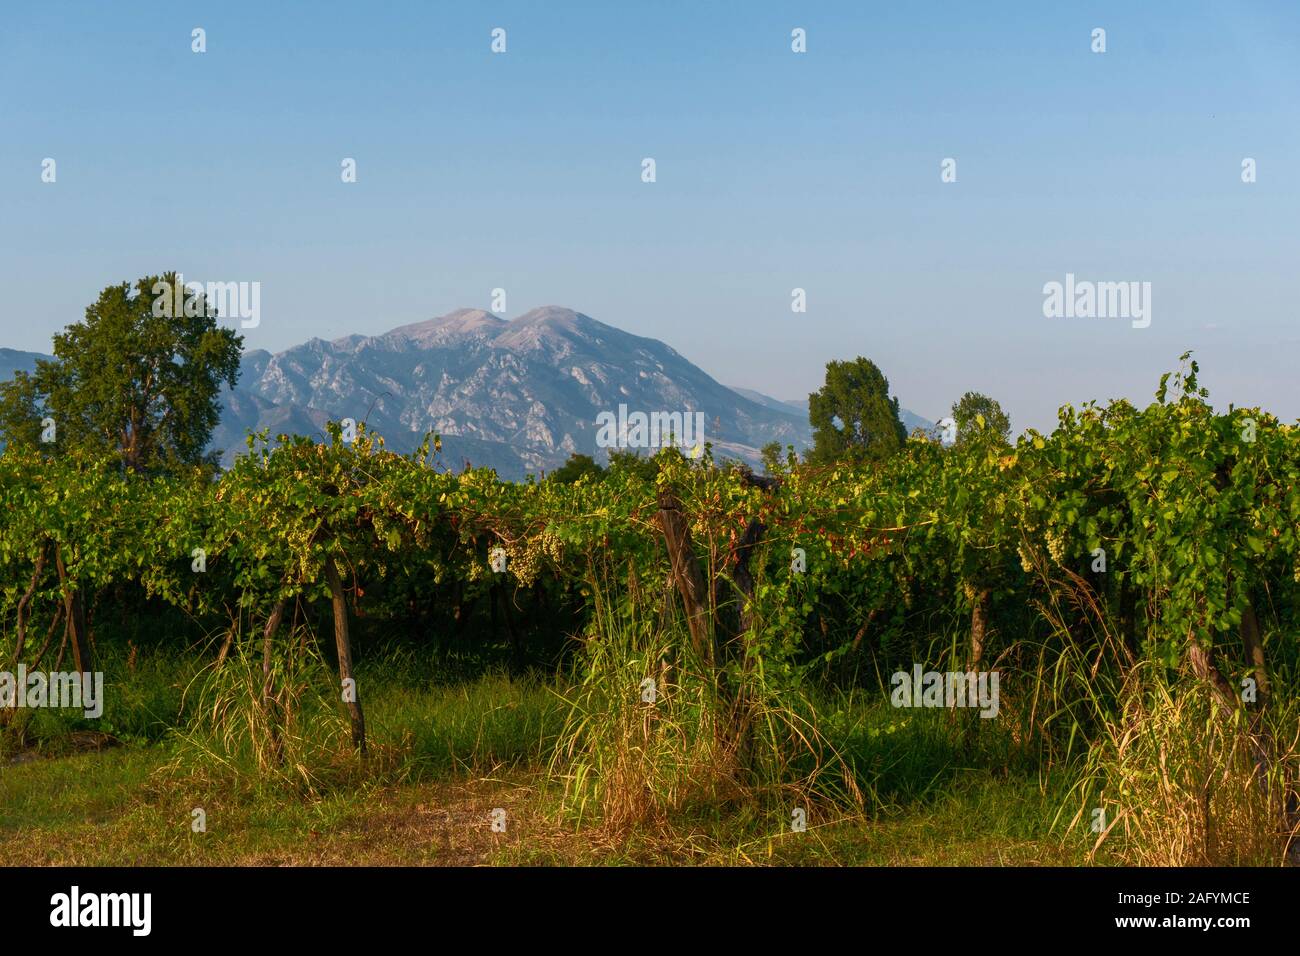 Deciduous trees and a mountain against the sky in Greece horizontal Stock Photo